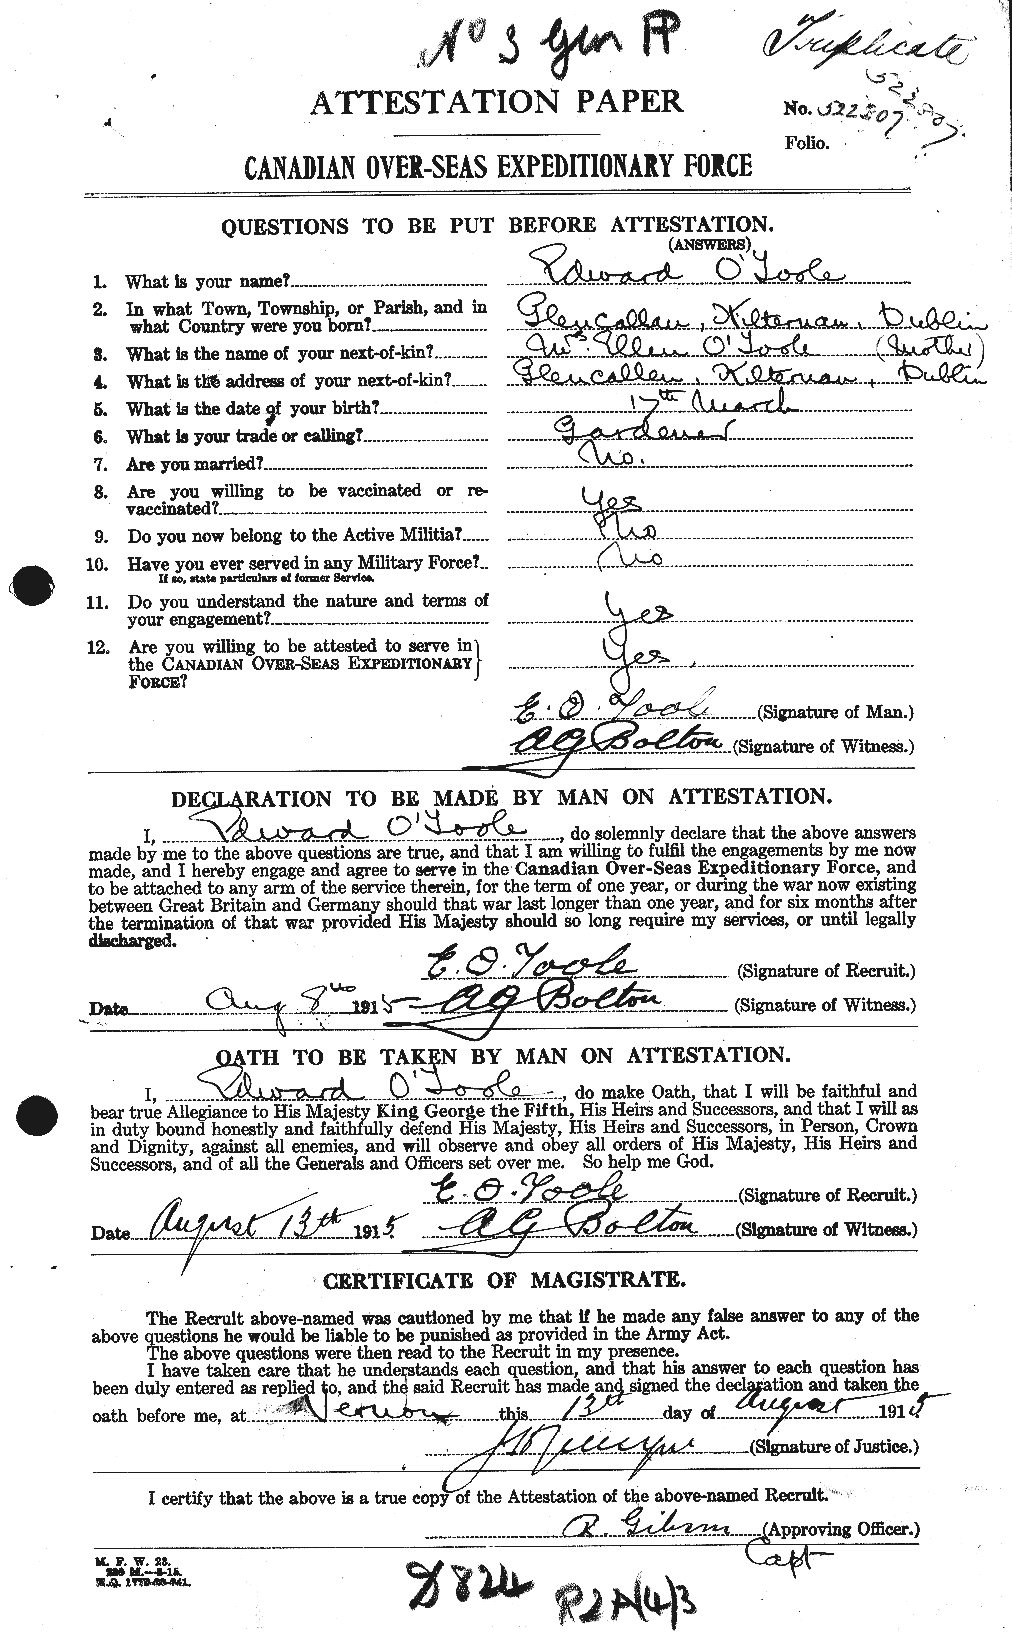 Personnel Records of the First World War - CEF 560424a